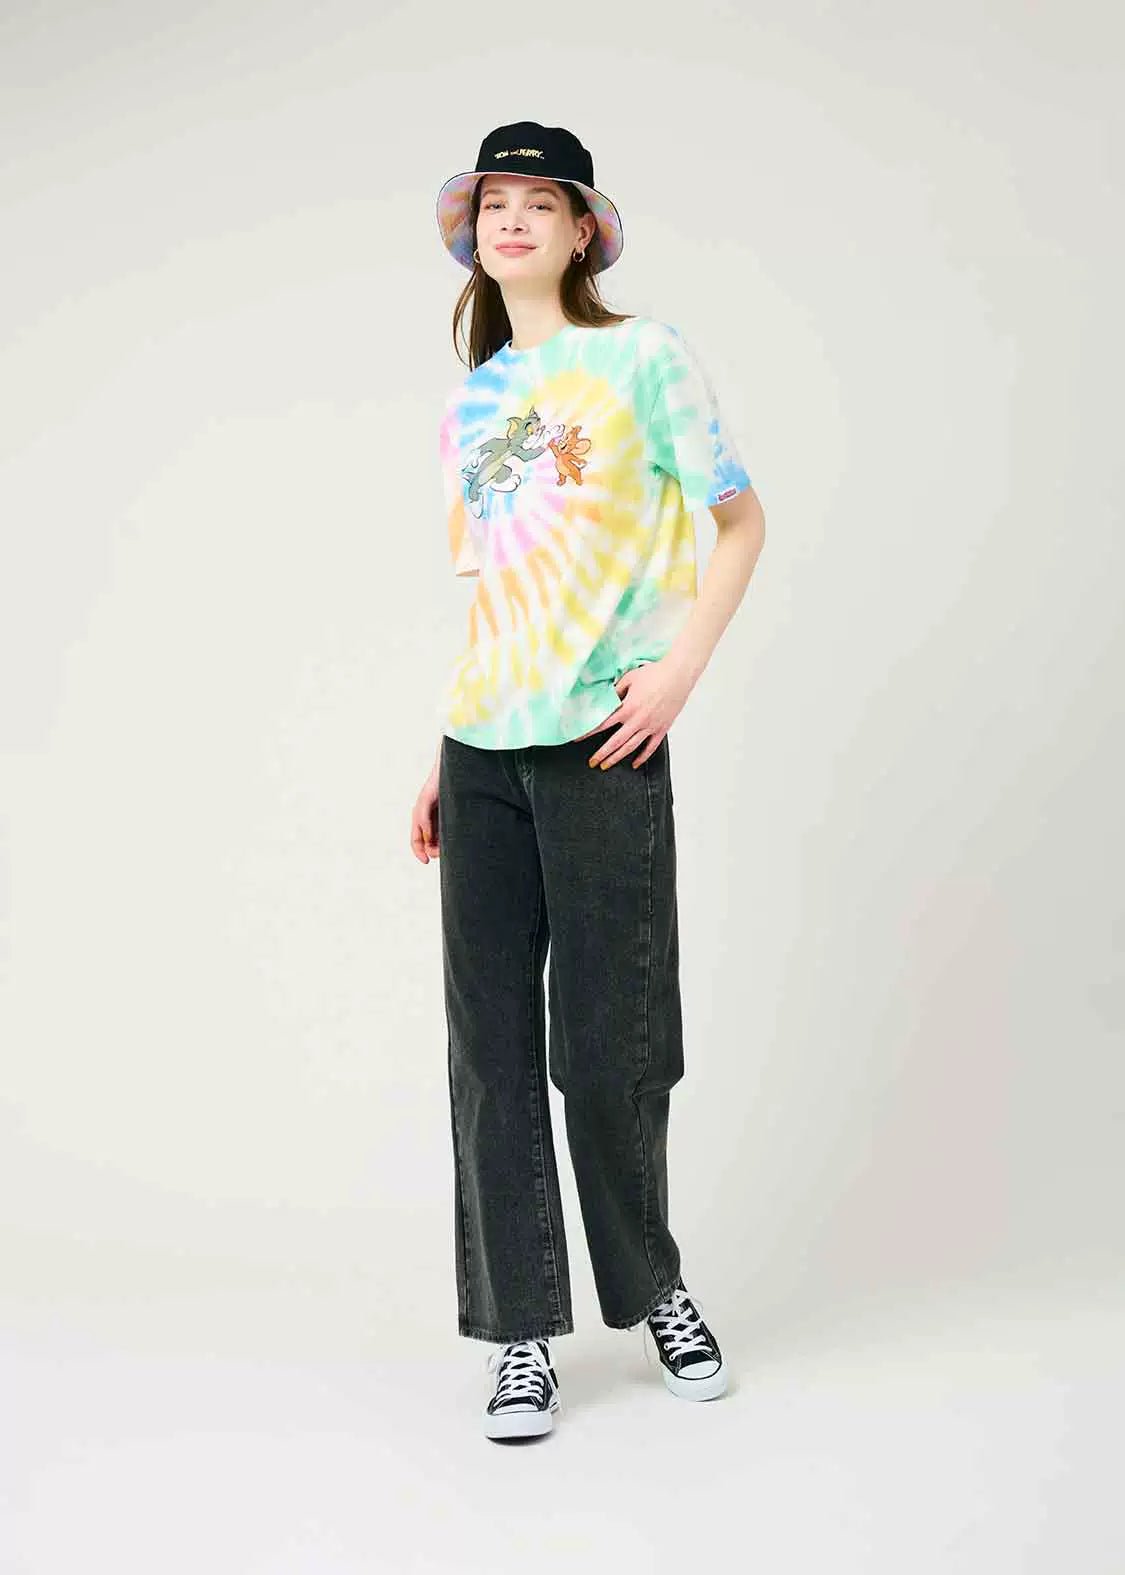 Tom and Jerry Tie Dye T - Shirts for Men and Women - Fun and Comfortable Casual Wear - Seakoff